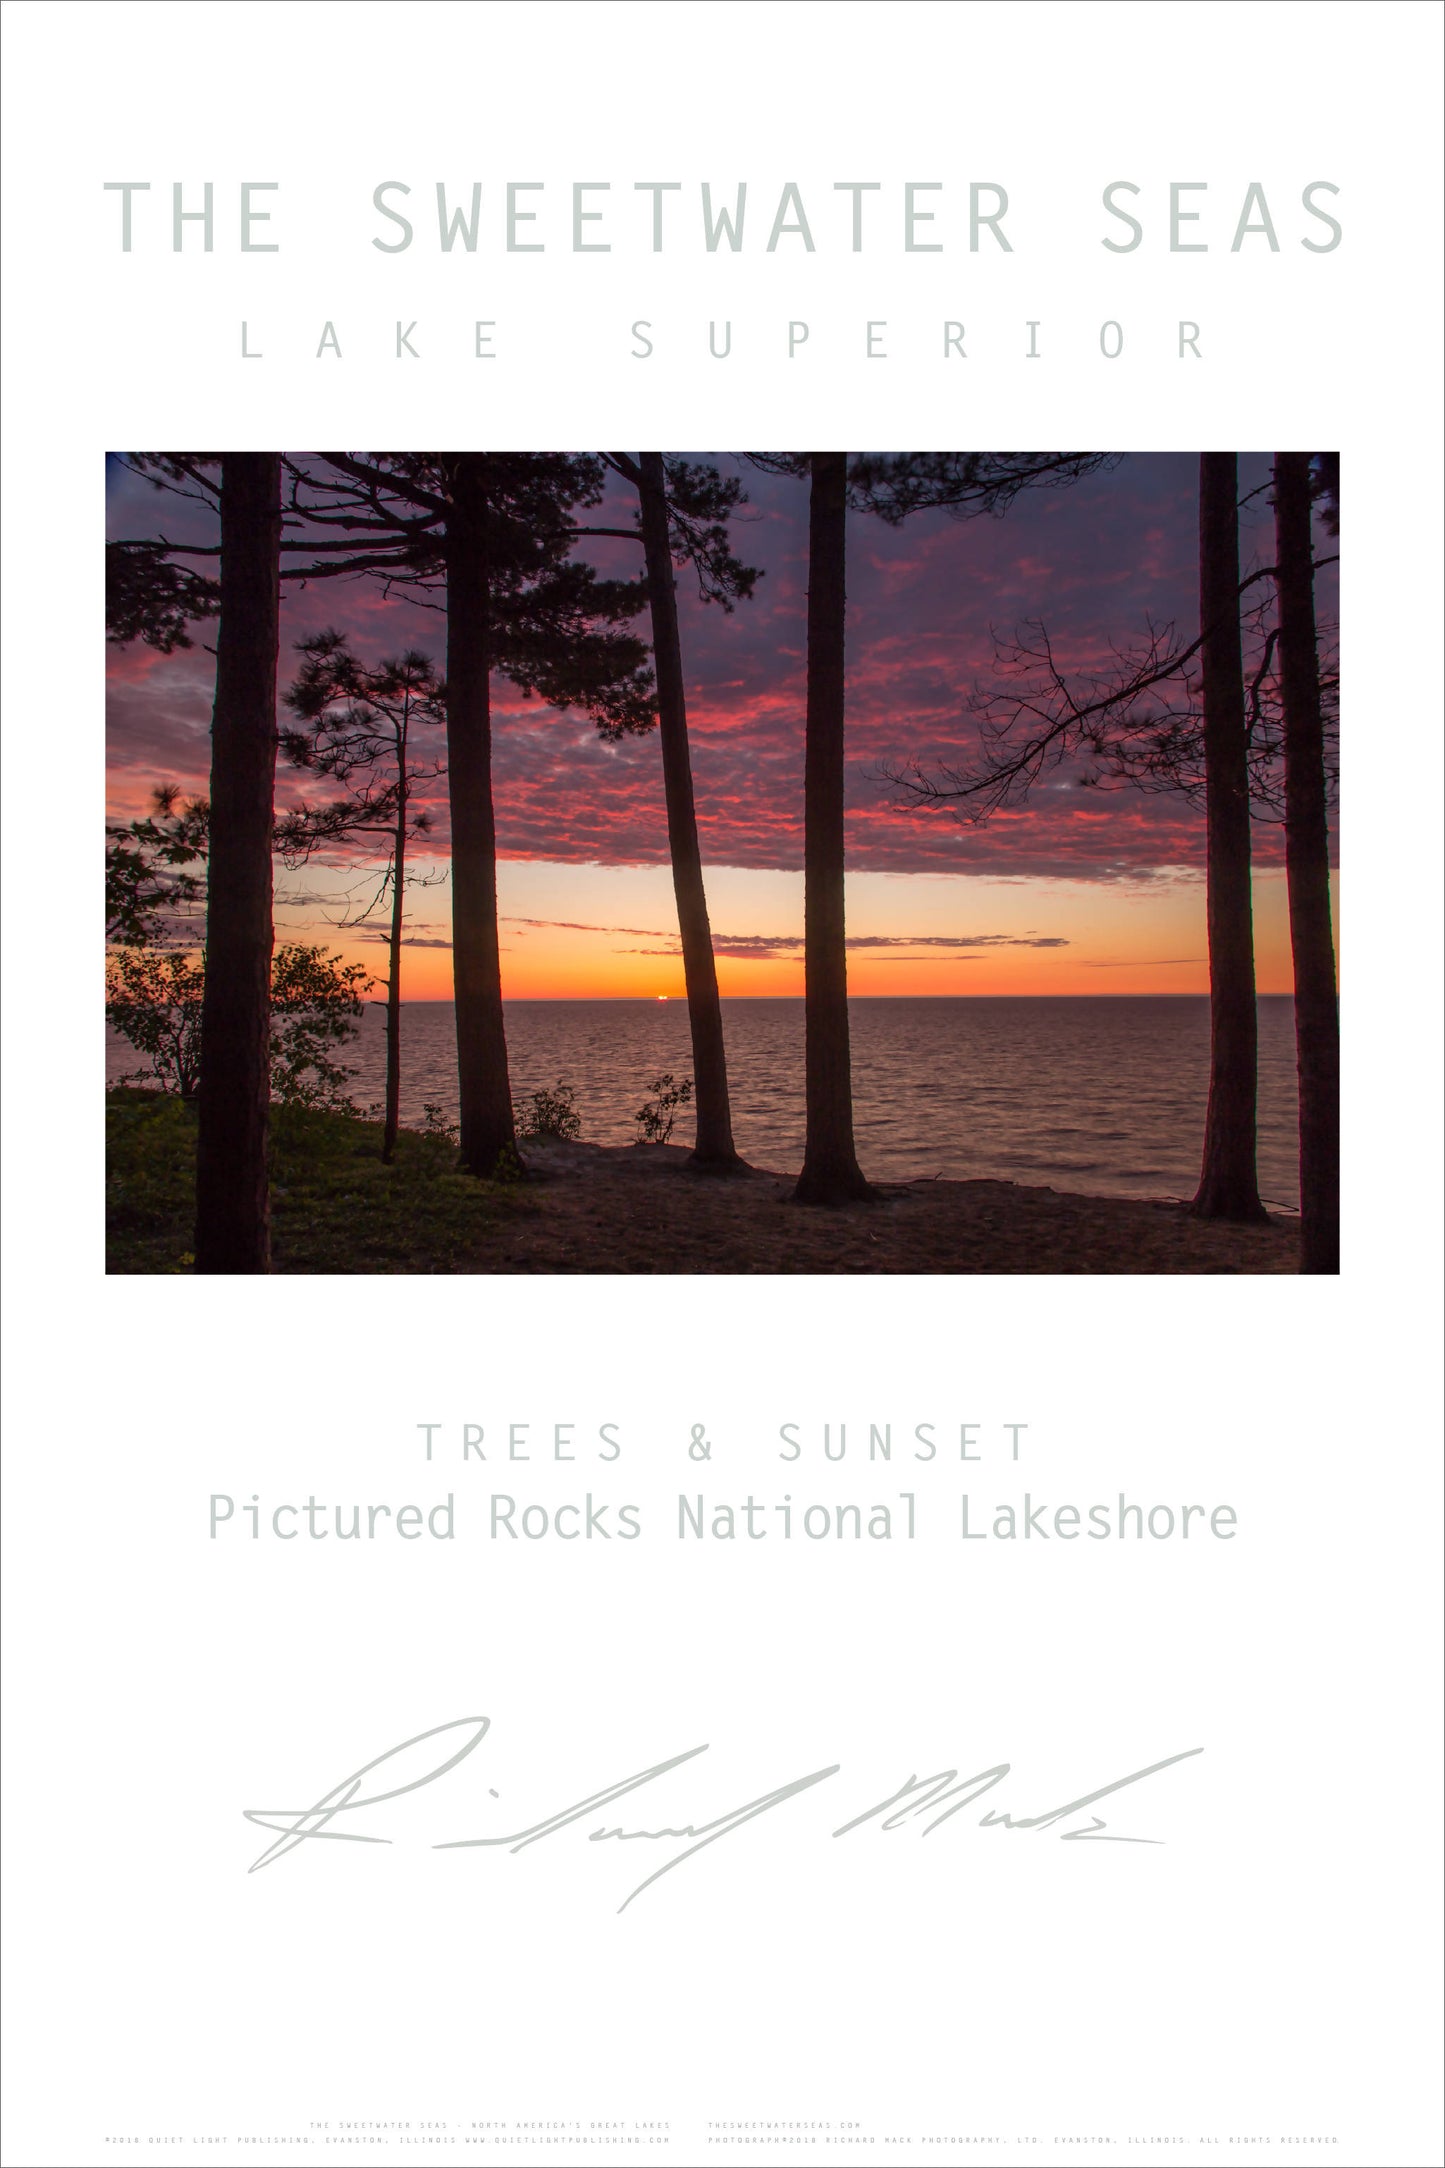 Sweetwater Seas Fine Art Poster - Lake Superior, Evening Pictured Rocks NLS